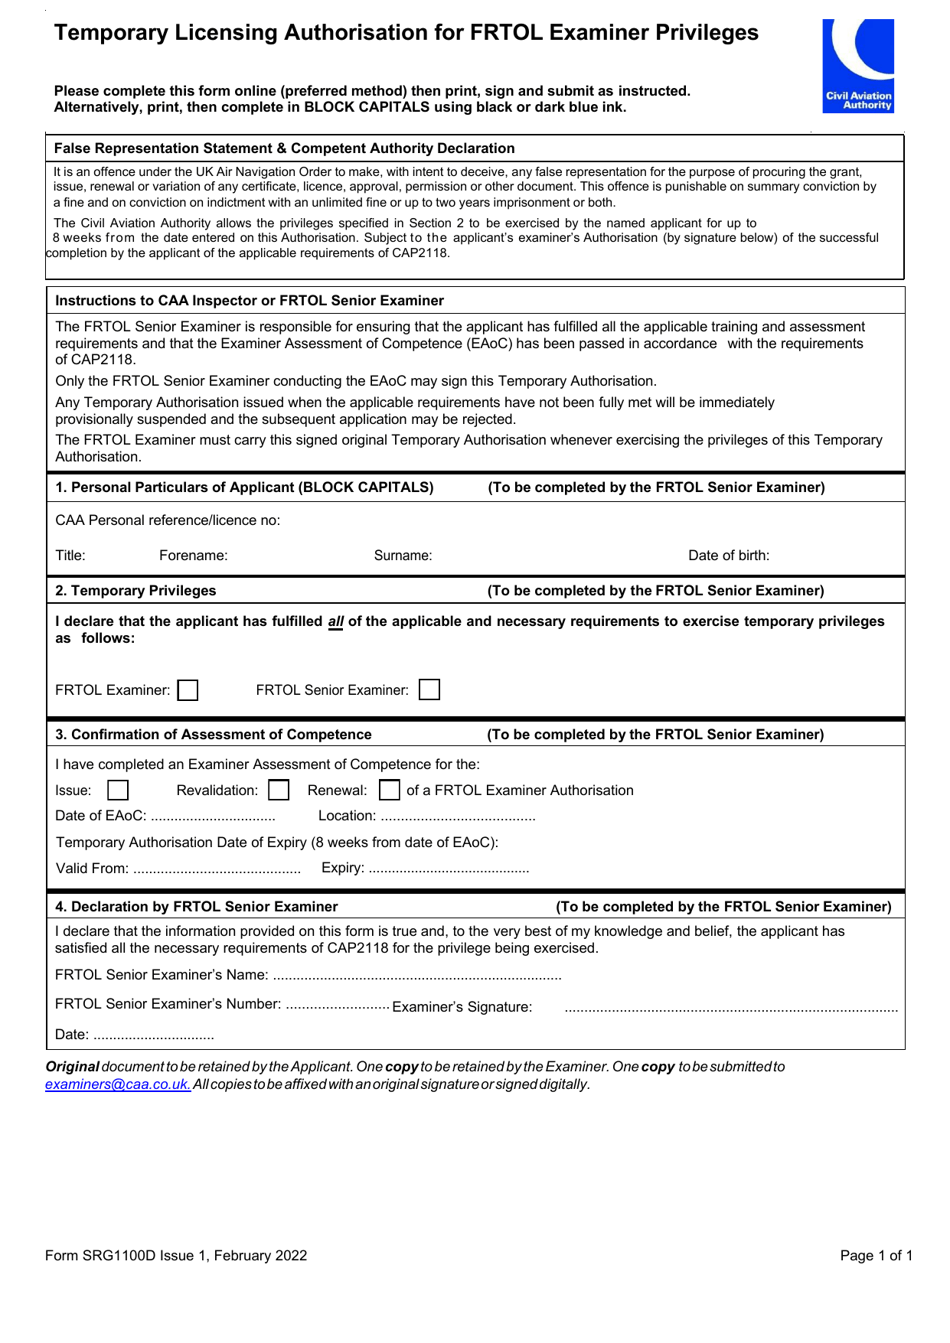 Form SRG1100D Temporary Licensing Authorisation for Frtol Examiner Privileges - United Kingdom, Page 1